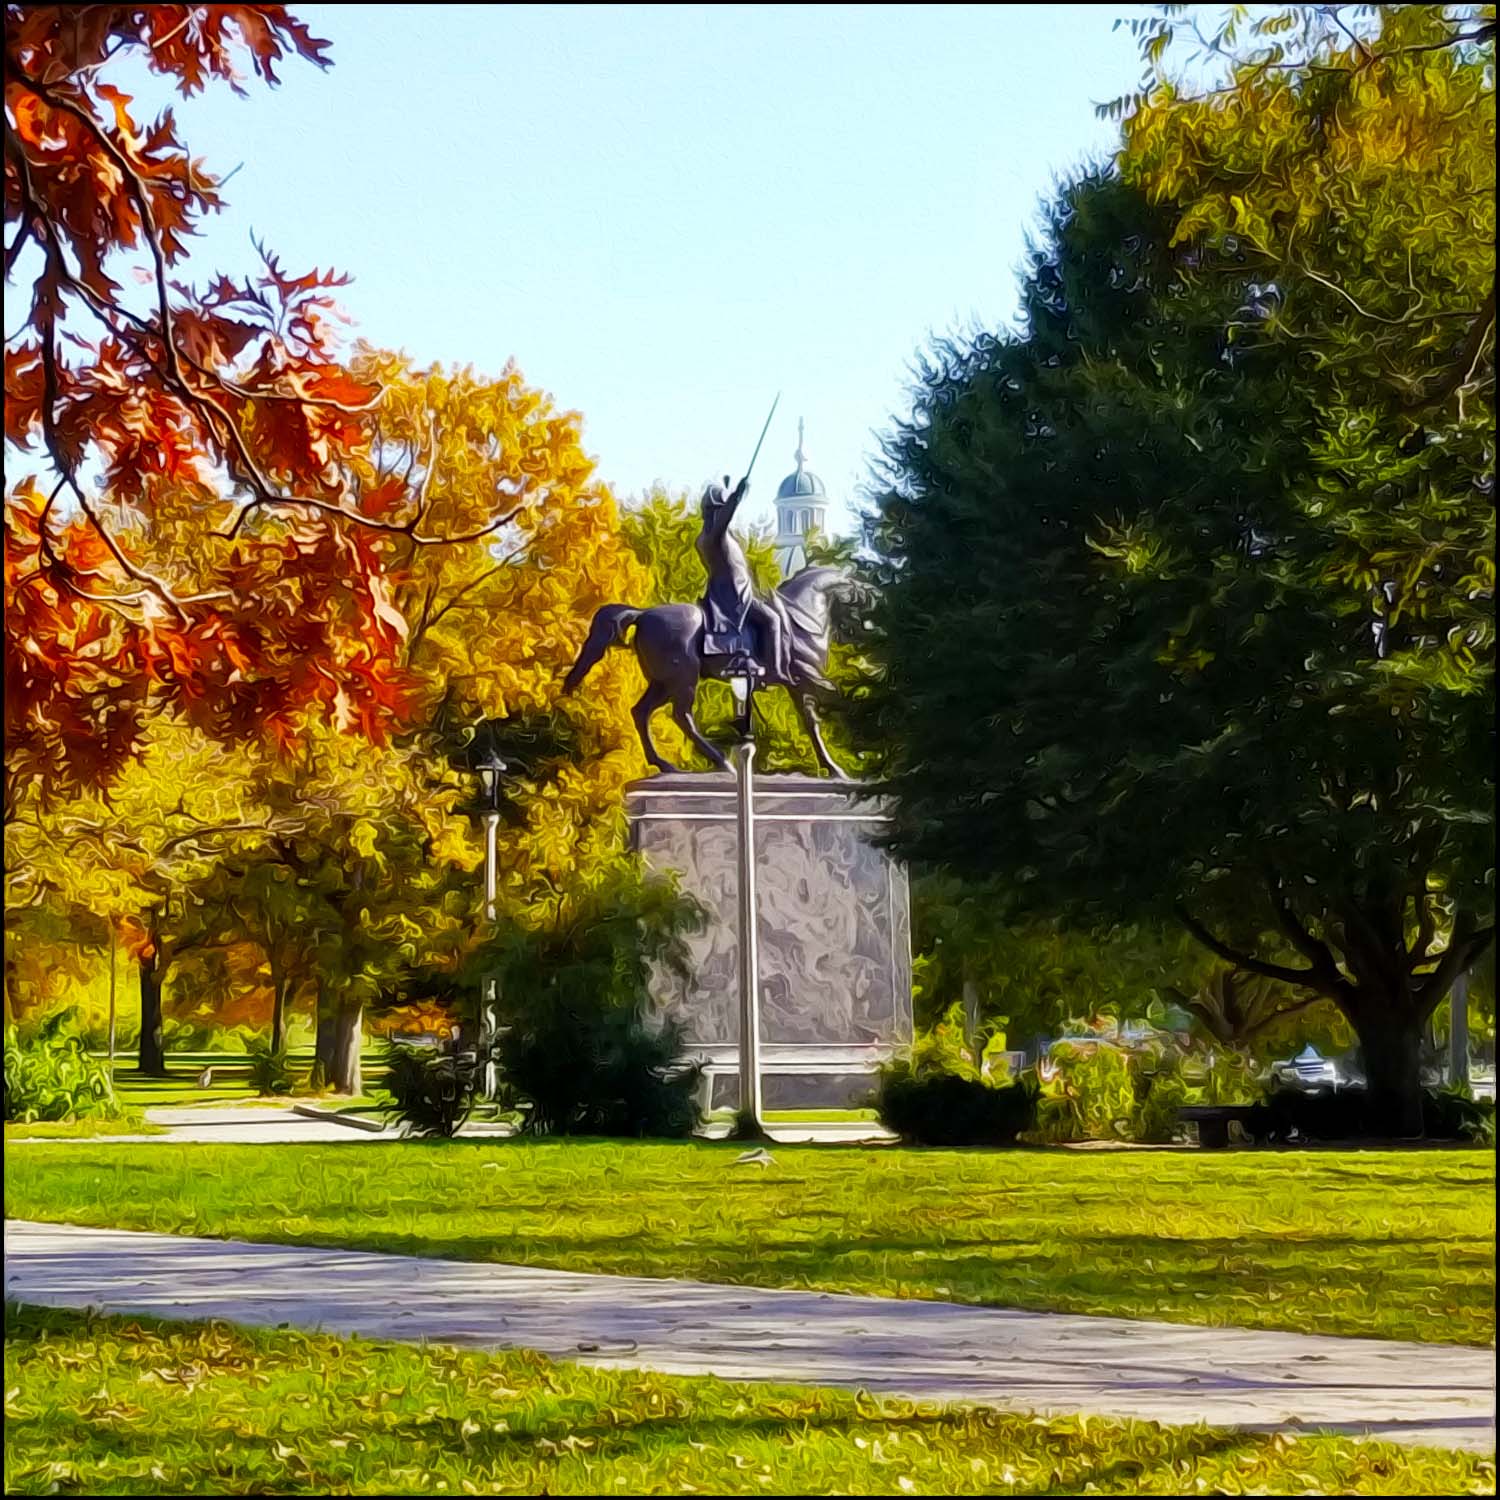 Milwaukee County's Emerald Necklace: Picture of Kościuszko Park's equestrian statue with the basilica dome in background. The park sits kitty-corner to the early Milwaukee Polonia’s beloved Basilica of St. Josaphat. 